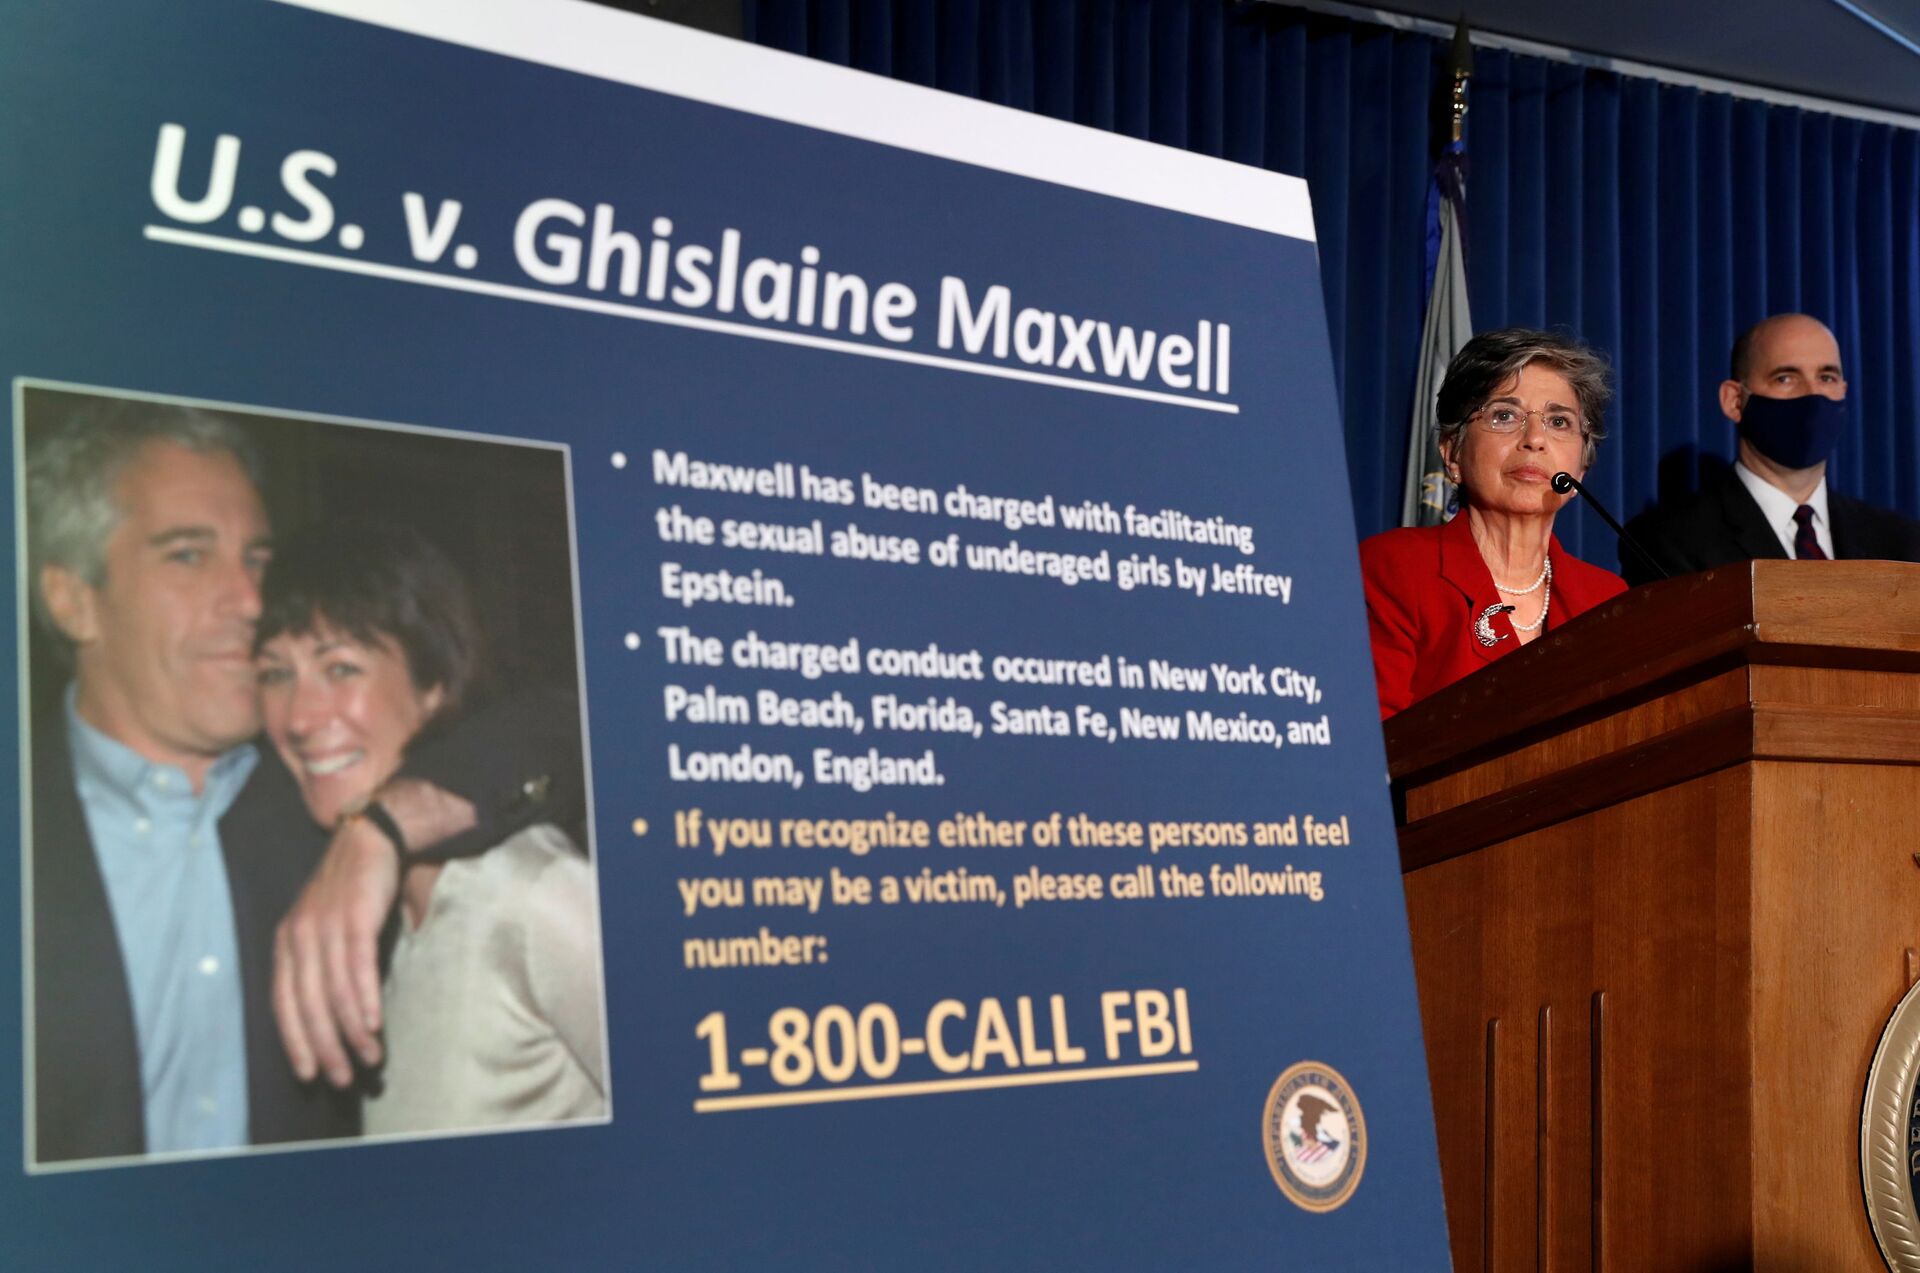 FILE PHOTO: Audrey Strauss, acting U.S. attorney for the Southern District of New York, speaks alongside William F. Sweeney Jr., assistant director-in-charge of the New York Office, at a news conference announcing charges against Ghislaine Maxwell for her alleged role in the sexual exploitation and abuse of minor girls by Jeffrey Epstein in New York City, New York, U.S., July 2, 2020 - Sputnik International, 1920, 30.11.2021